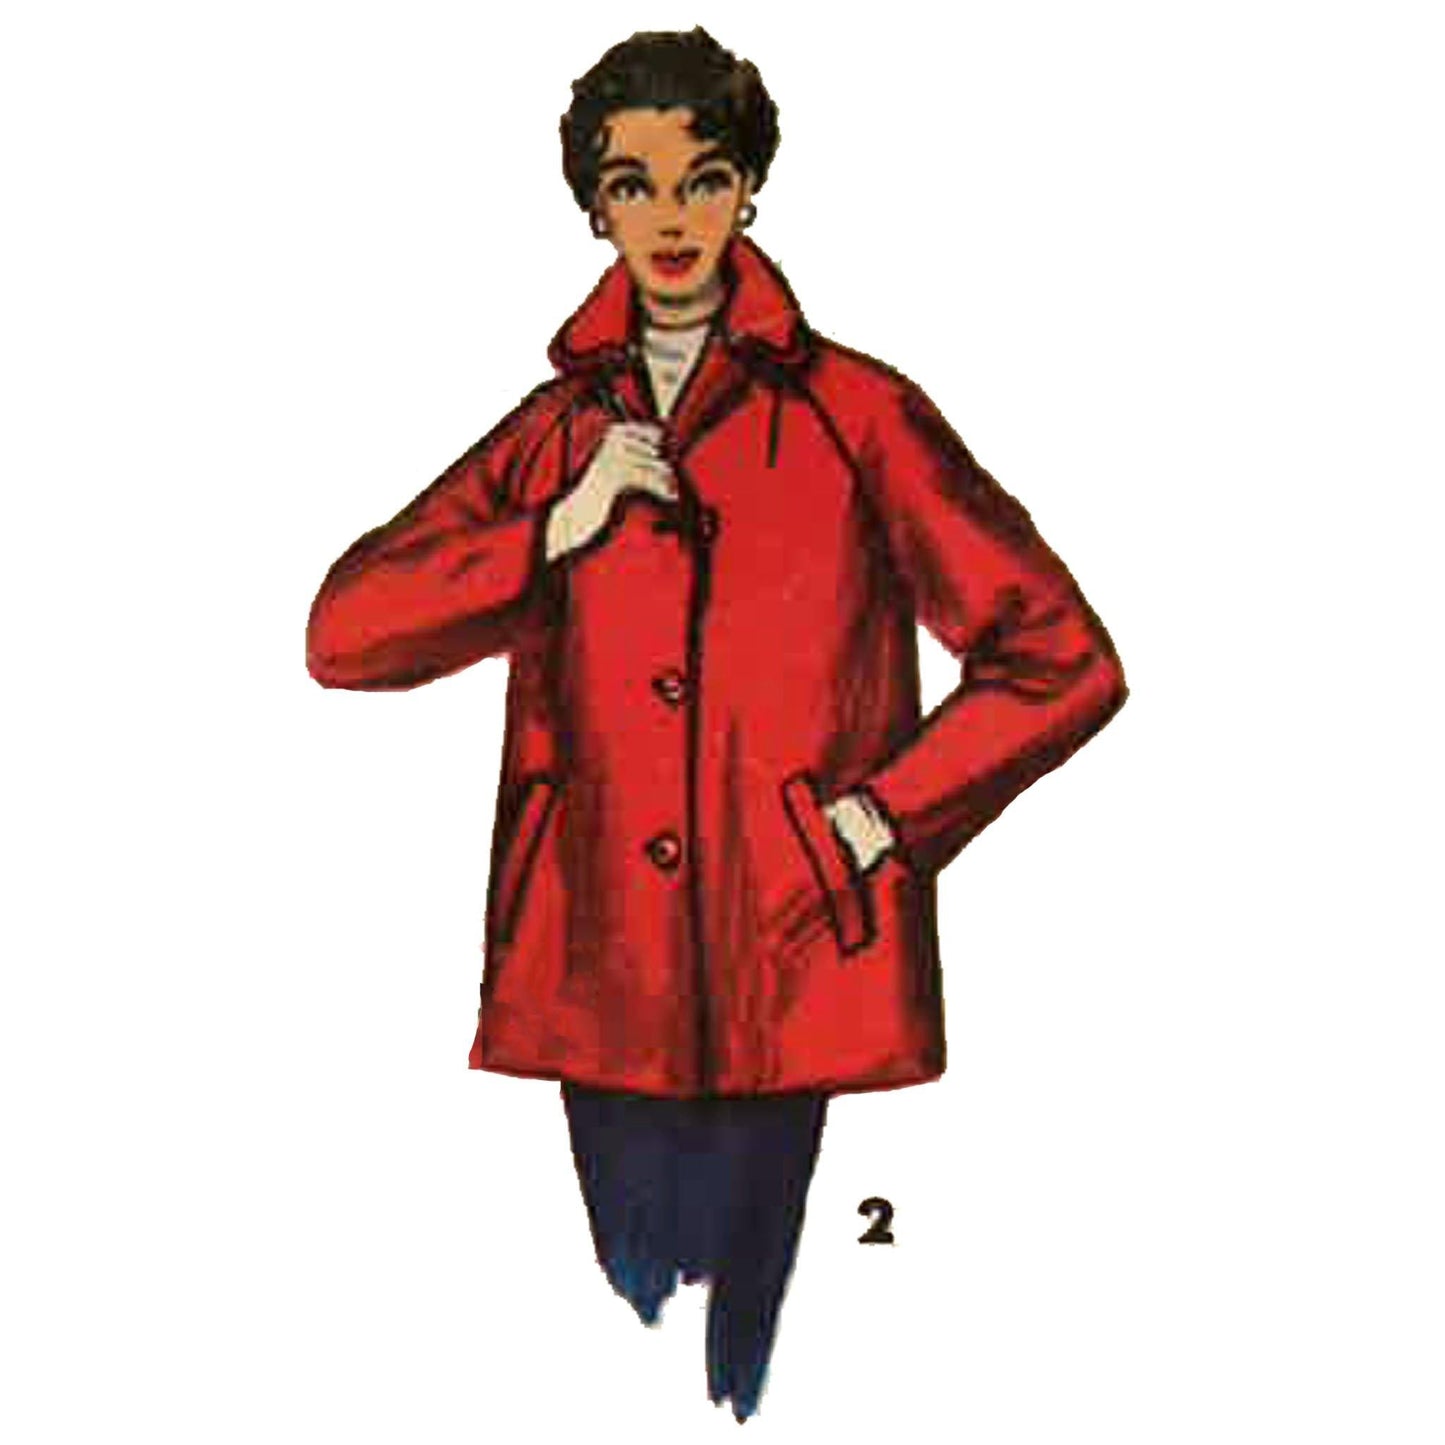 Woman wearing a red jacket.